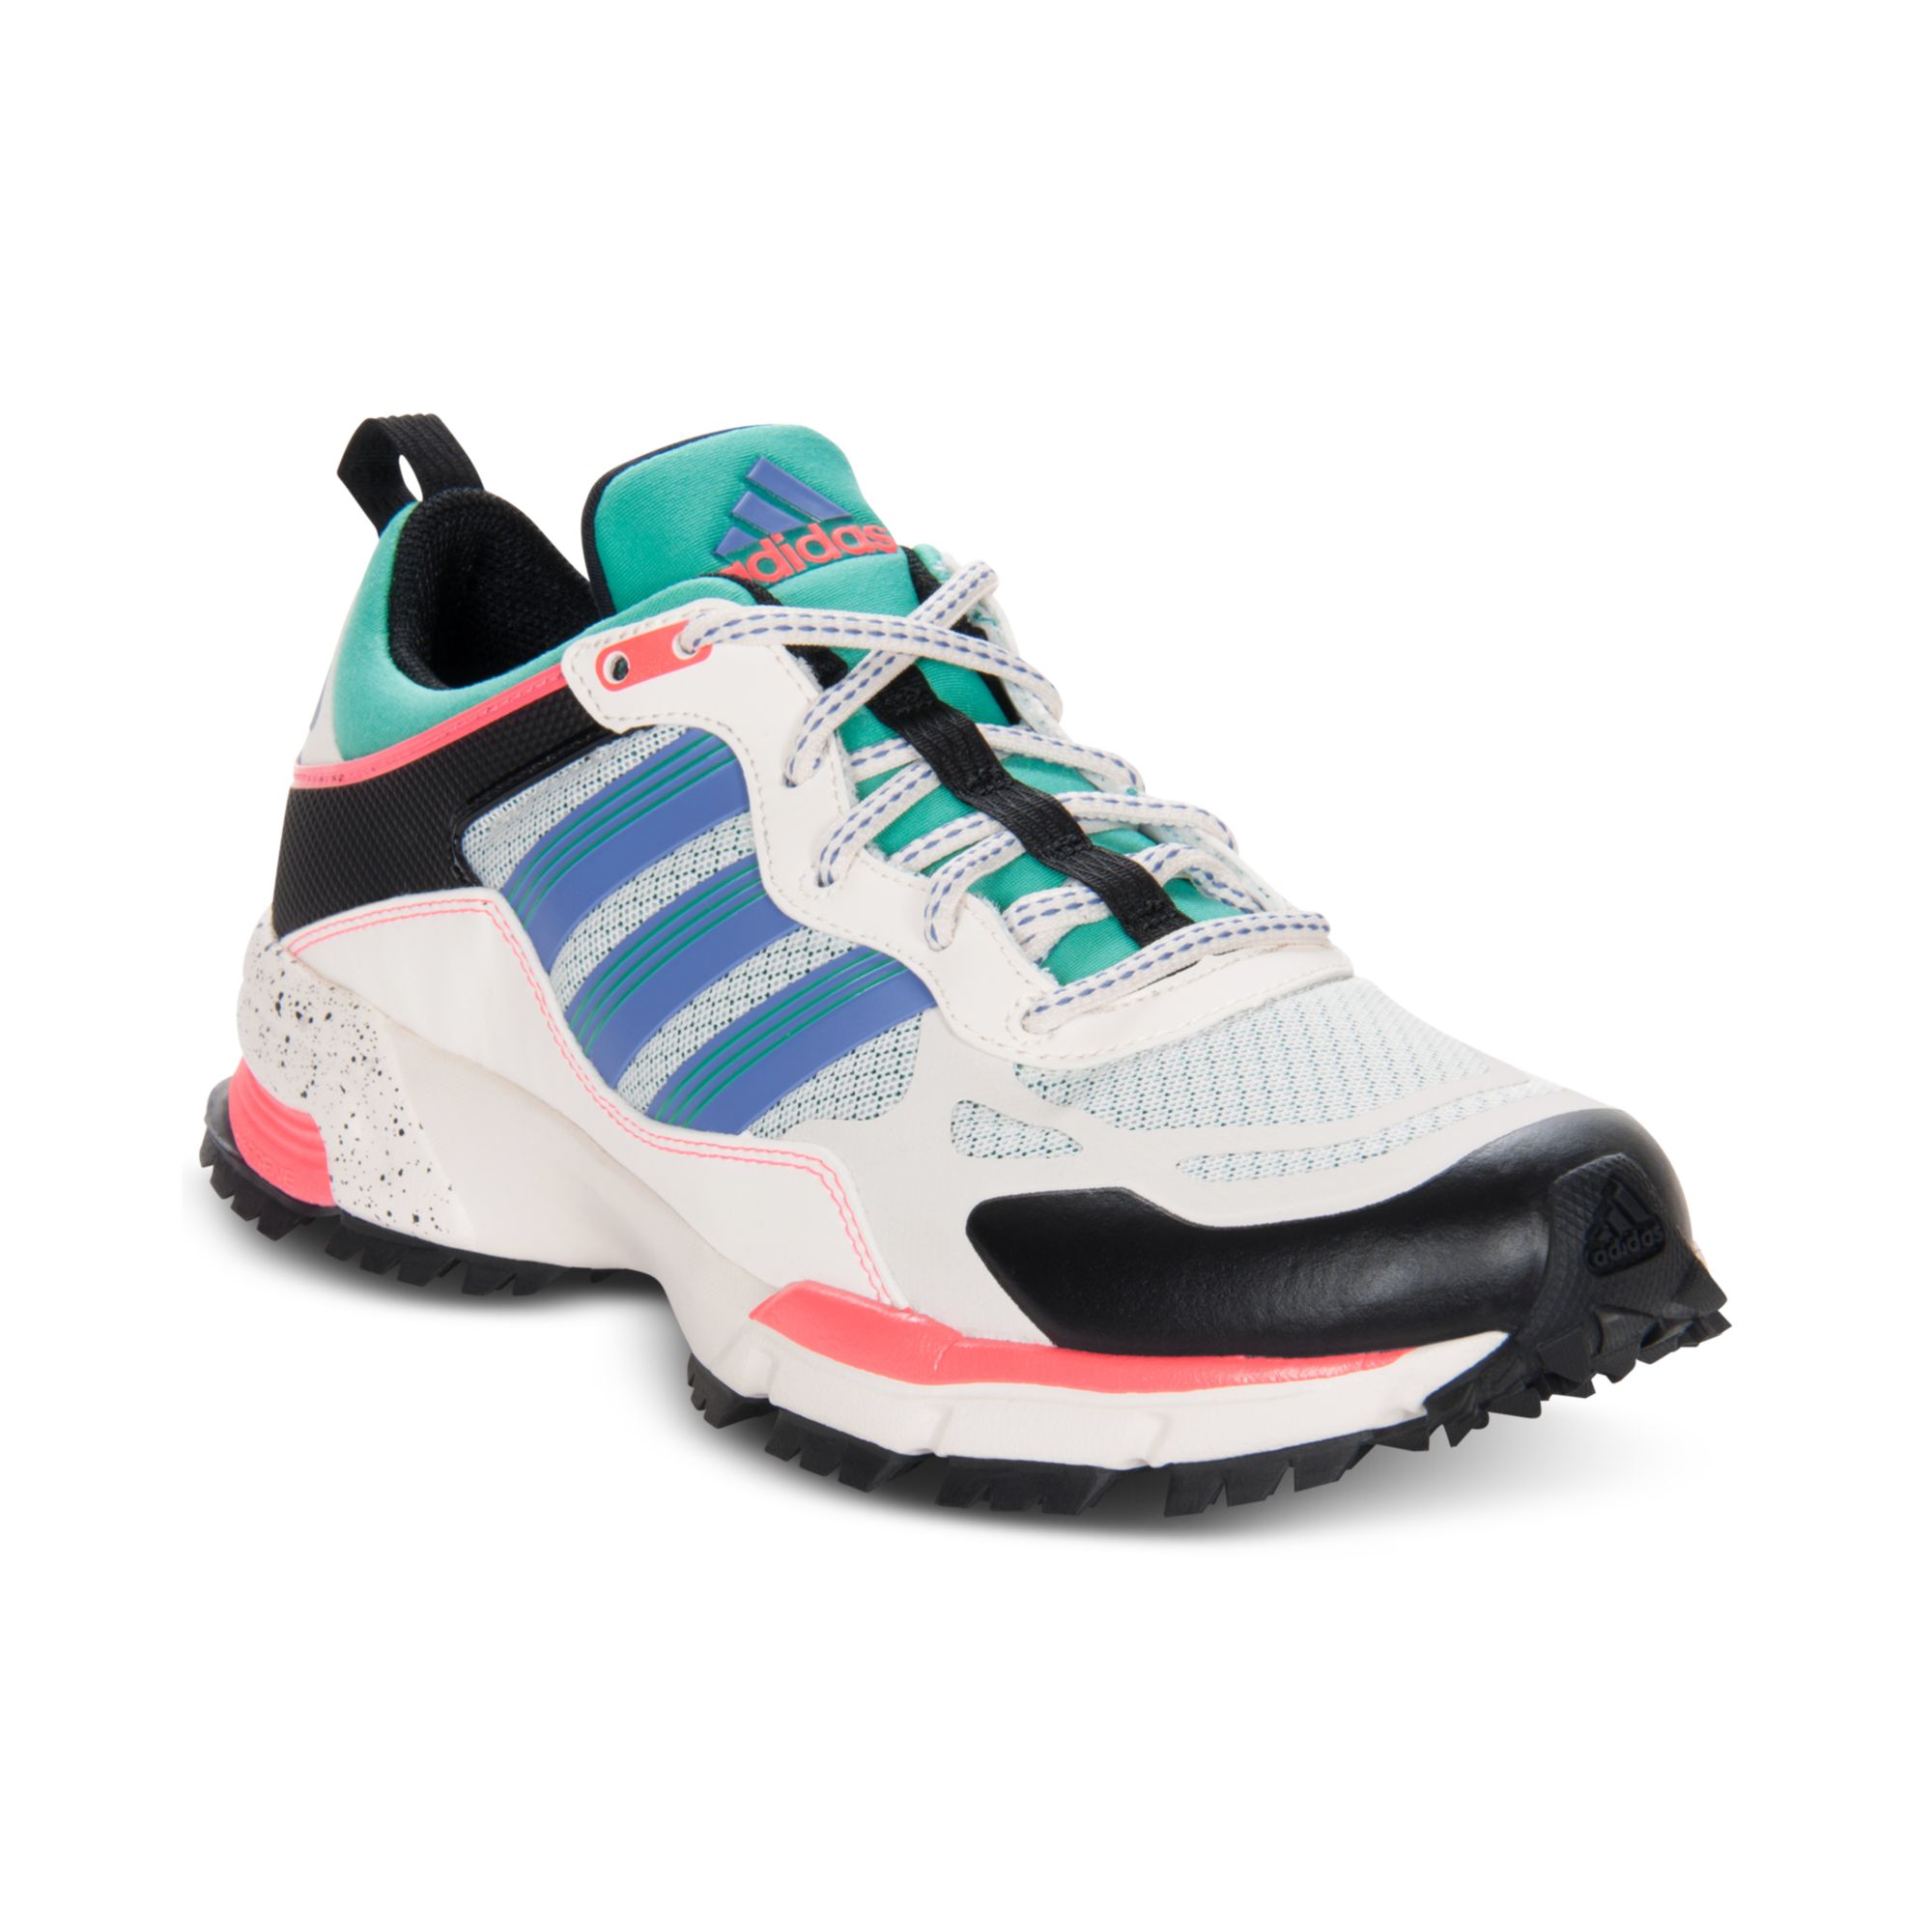 Adidas Response Trail Shoe Top Sellers, SAVE 49% - www.ecomedica.med.ec